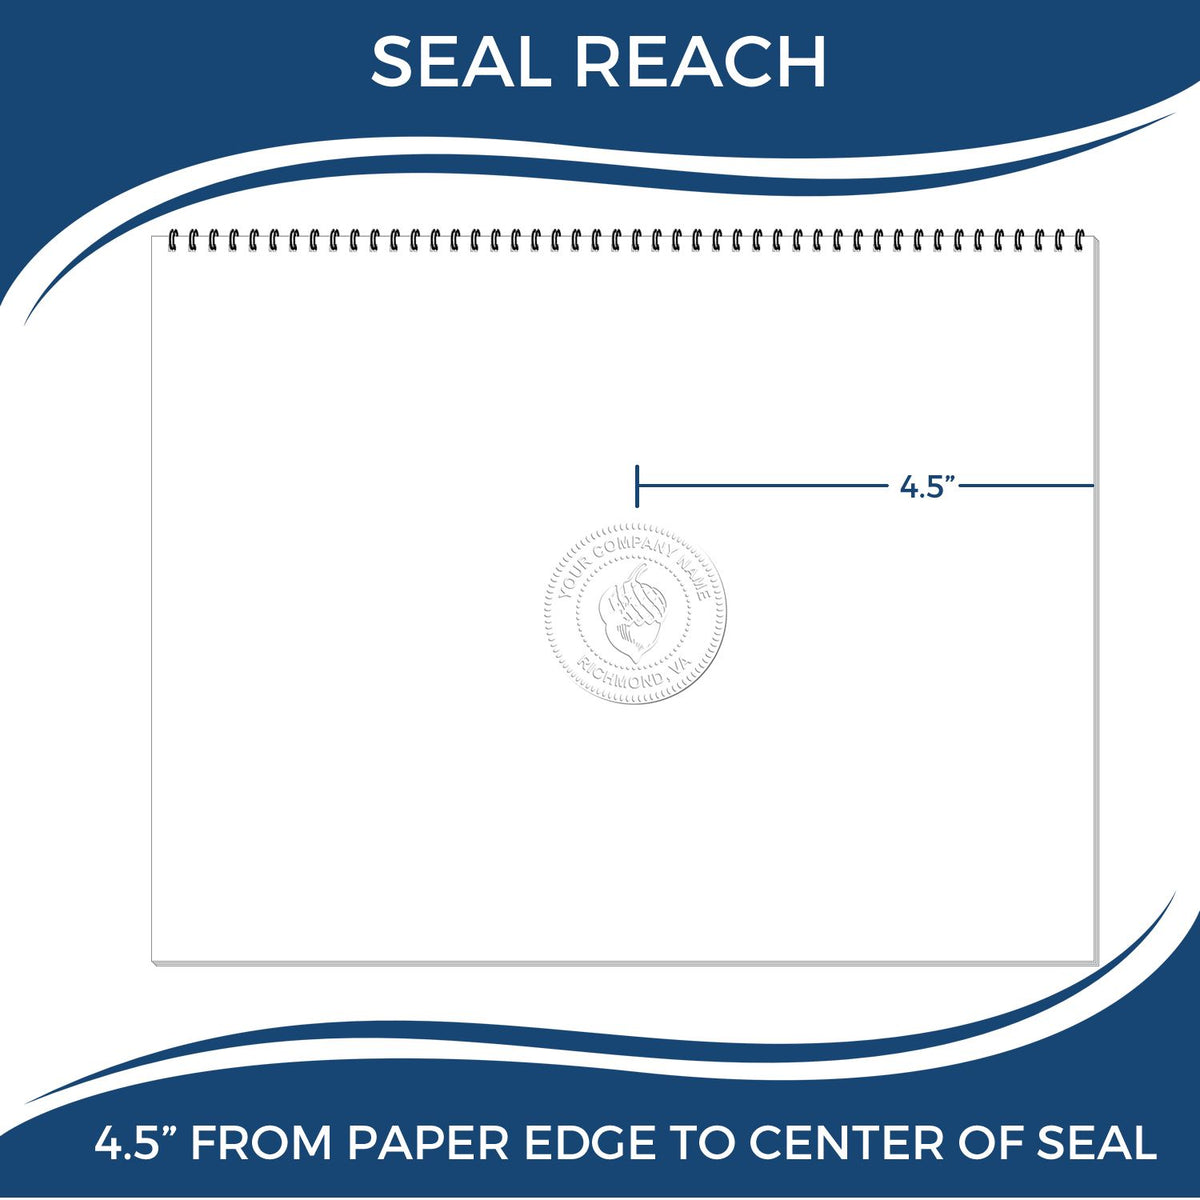 An infographic showing the seal reach which is represented by a ruler and a miniature seal image of the Extended Long Reach Maryland Architect Seal Embosser